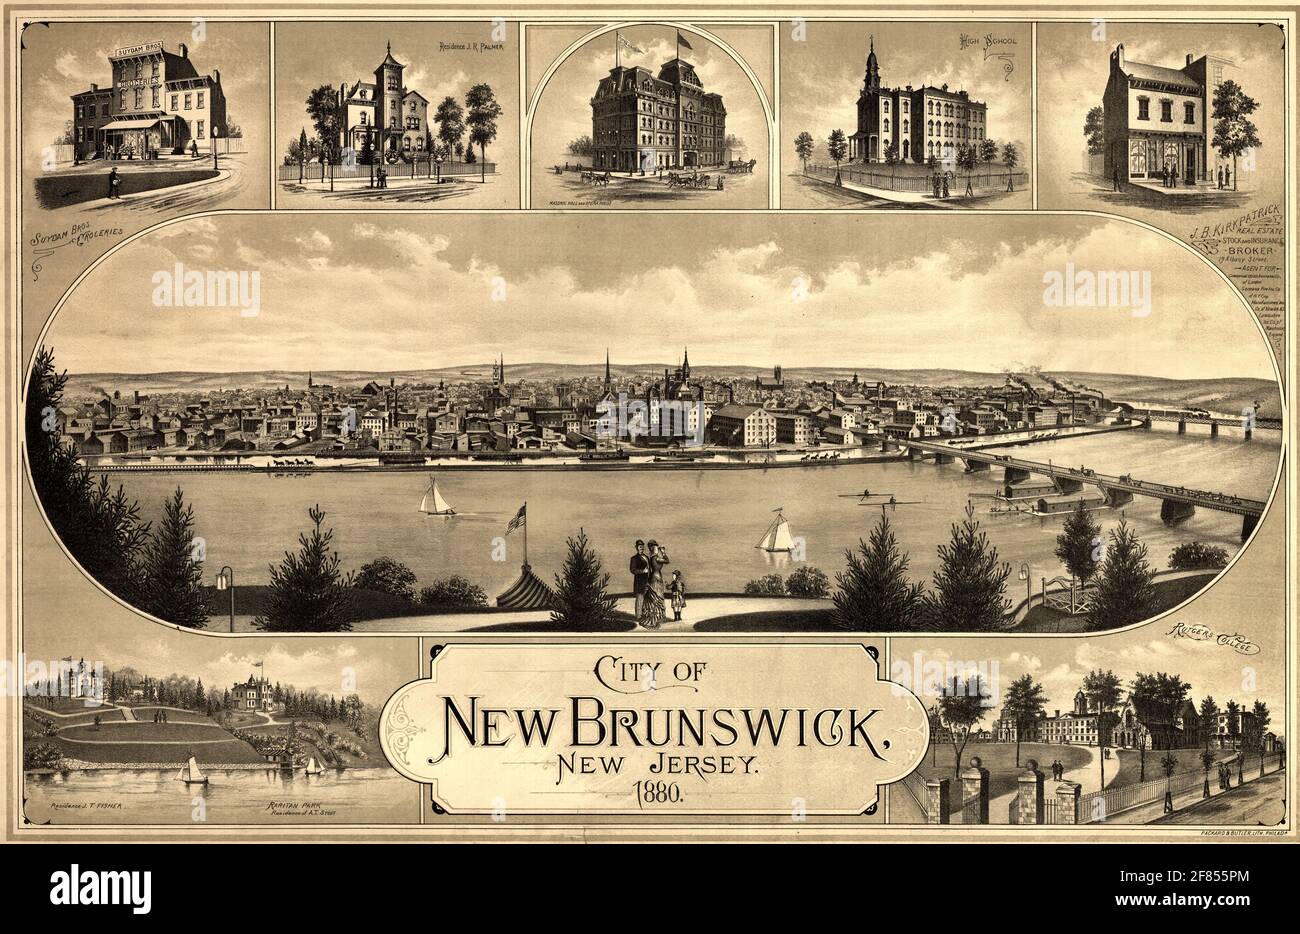 Bird's-eye view of New Brunswick, New Jersey showing Raritan River the foreground; vignettes of prominent buildings, such as Rutgers College, form the top and bottom borders 1880 Stock Photo